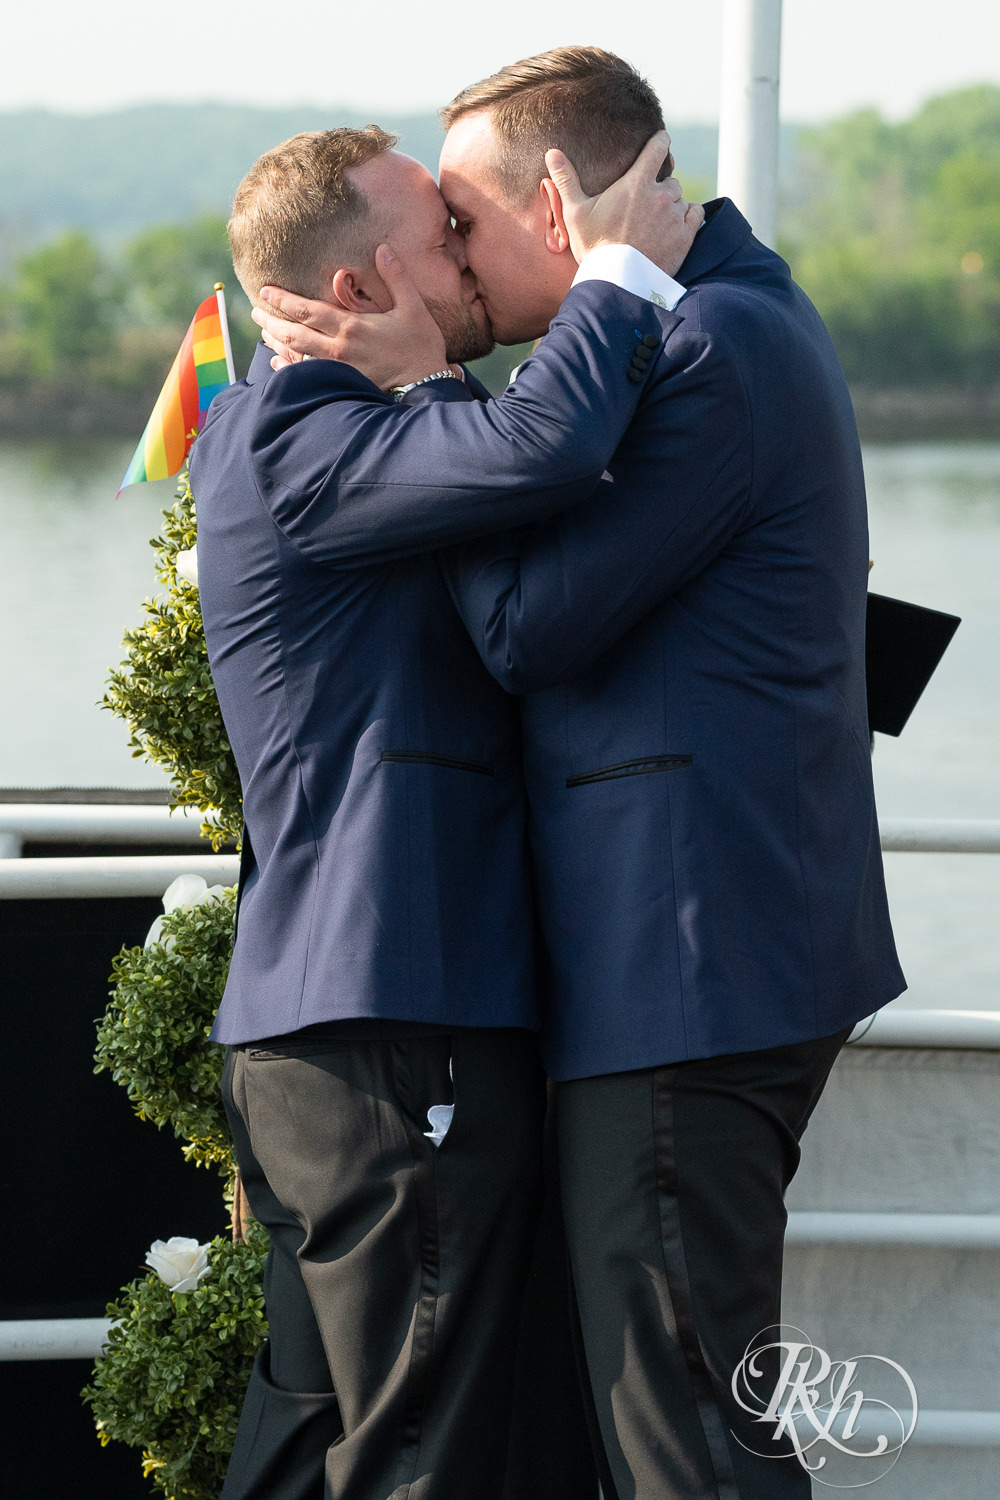 Grooms kiss after wedding ceremony on the Majestic Star by Stillwater River Boats in Stillwater, Minnesota.